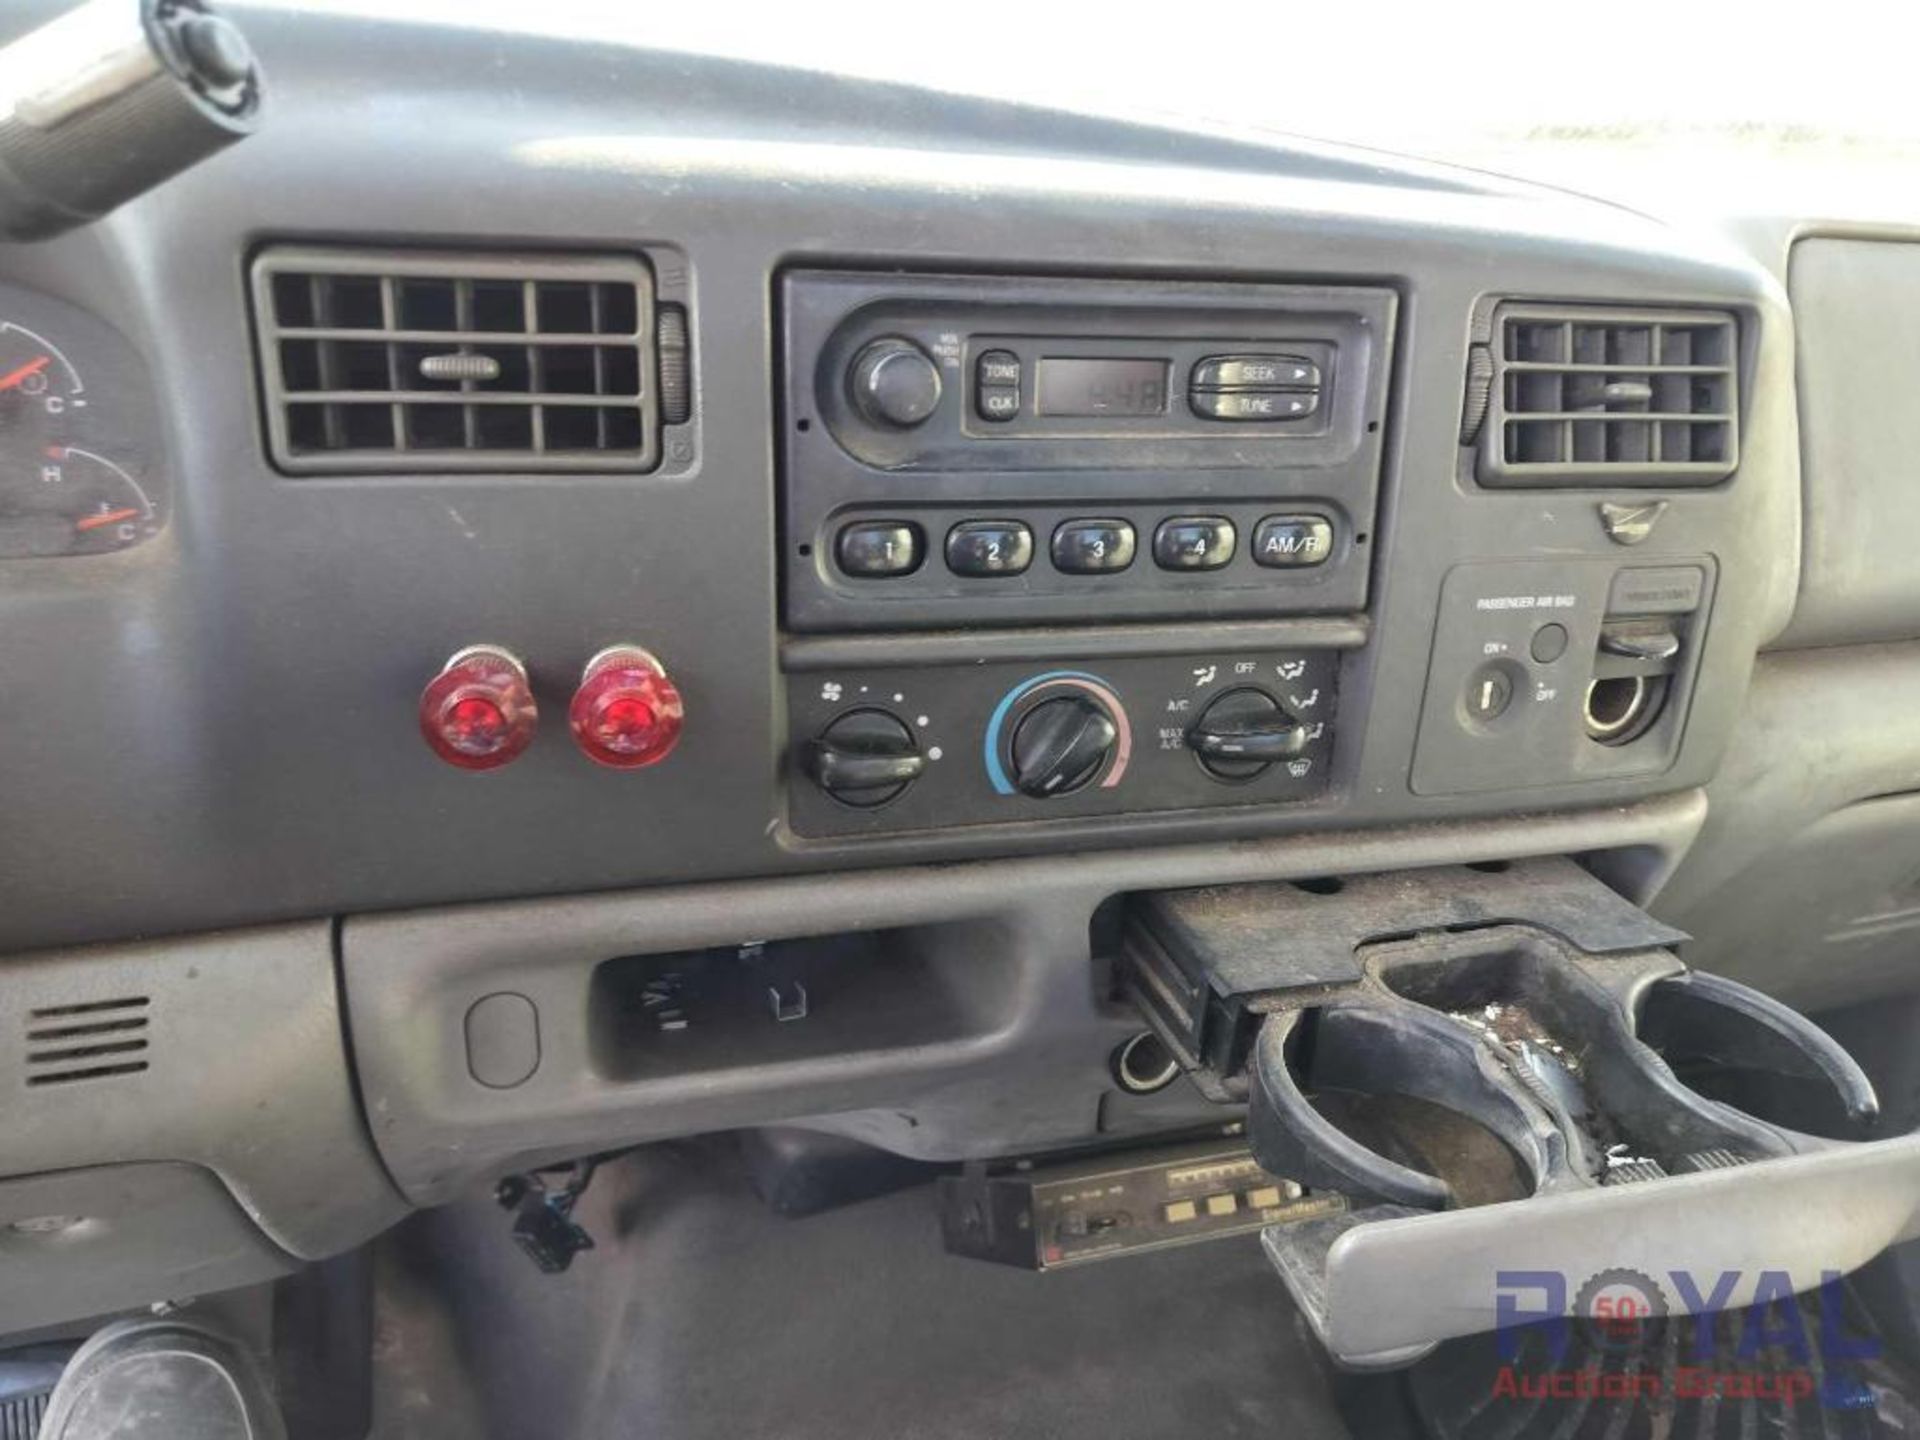 2002 Ford F250 Pickup Truck - Image 15 of 23